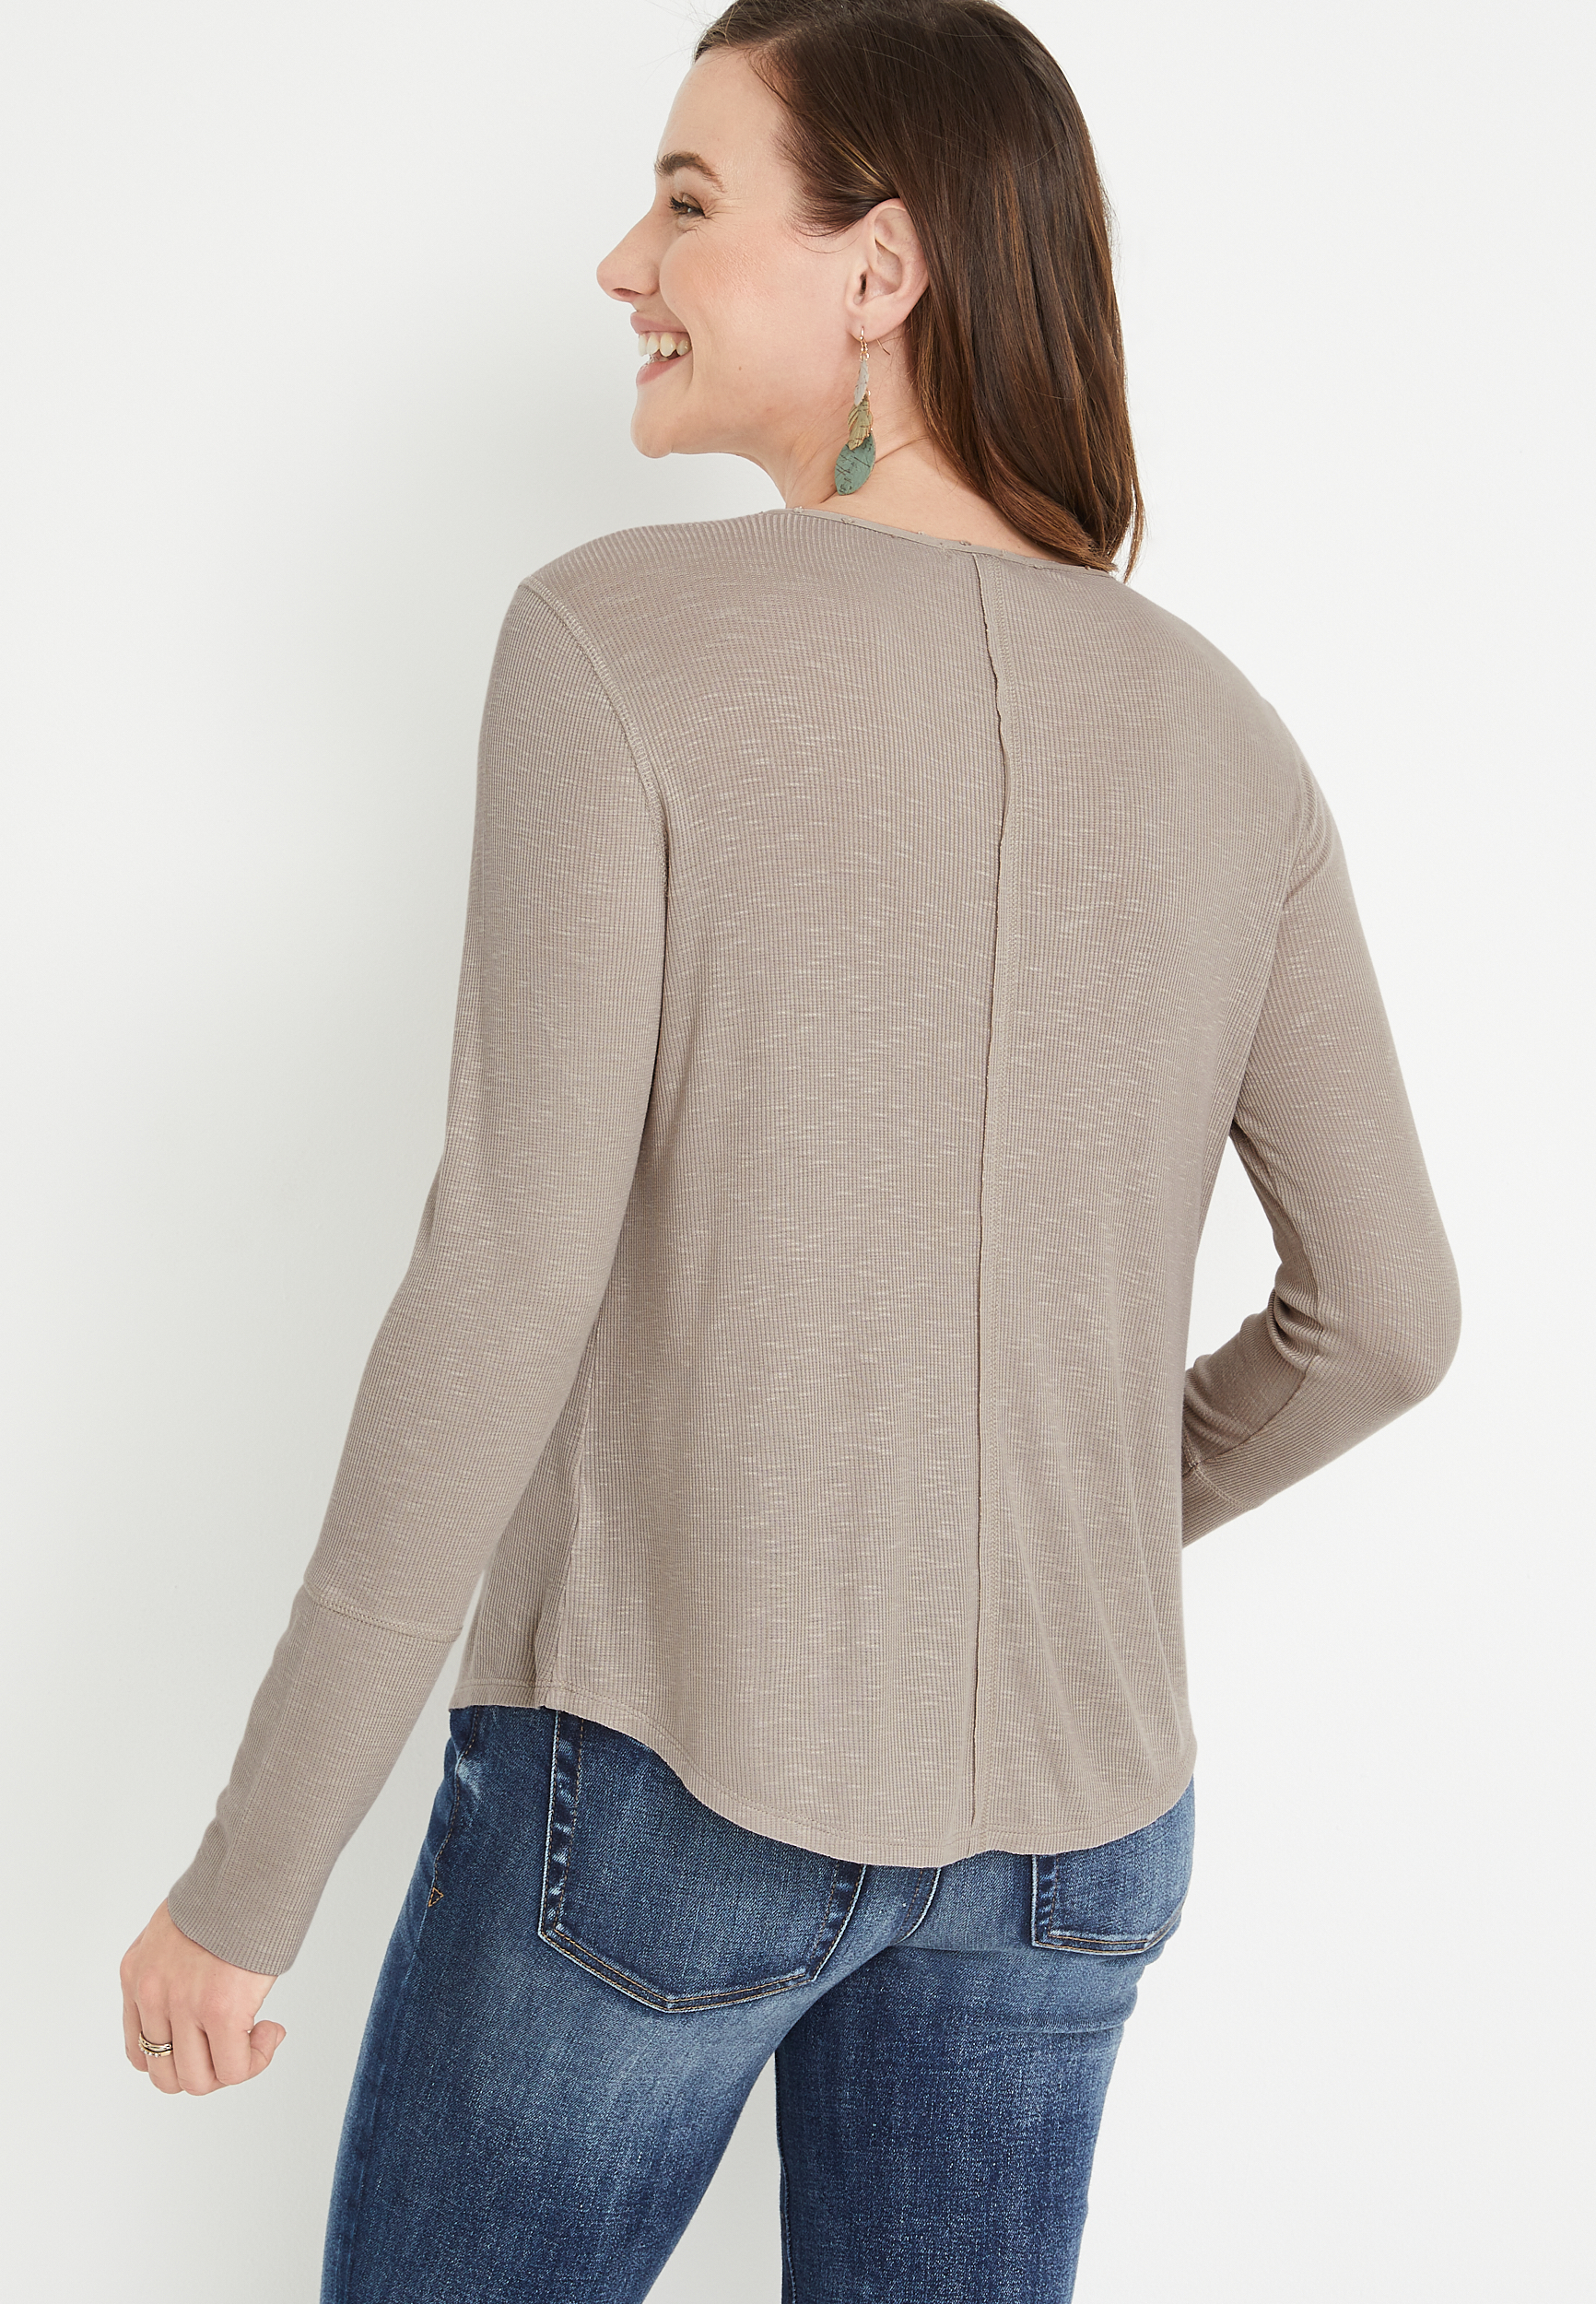 Solid Lace Long Sleeve Henley Top